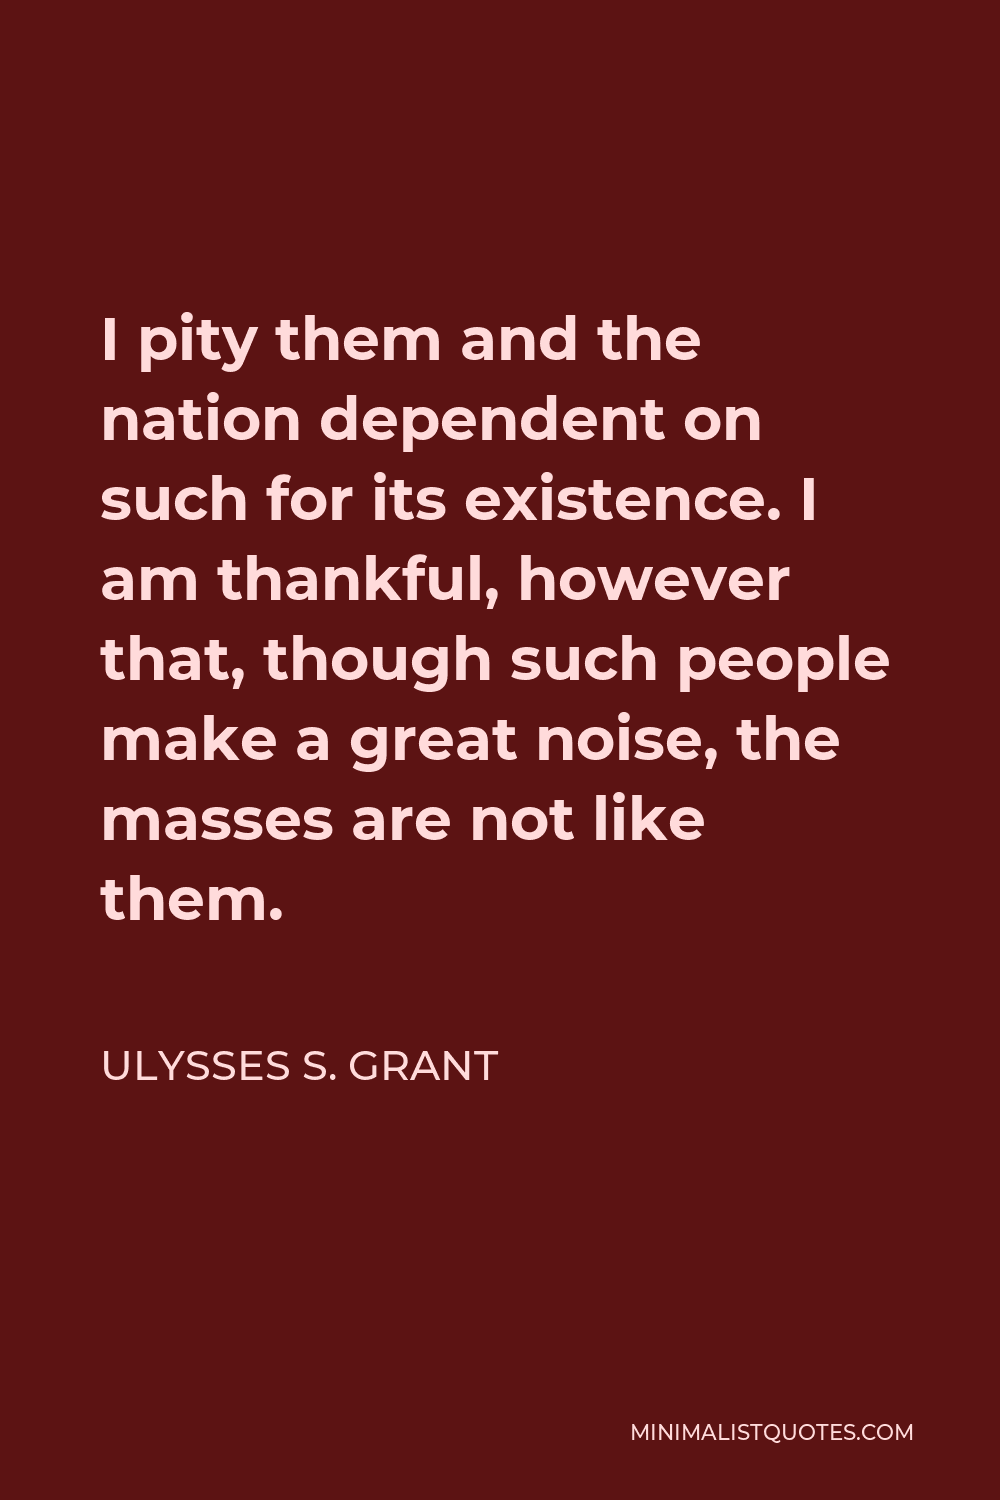 Ulysses S. Grant Quote - I pity them and the nation dependent on such for its existence. I am thankful, however that, though such people make a great noise, the masses are not like them.